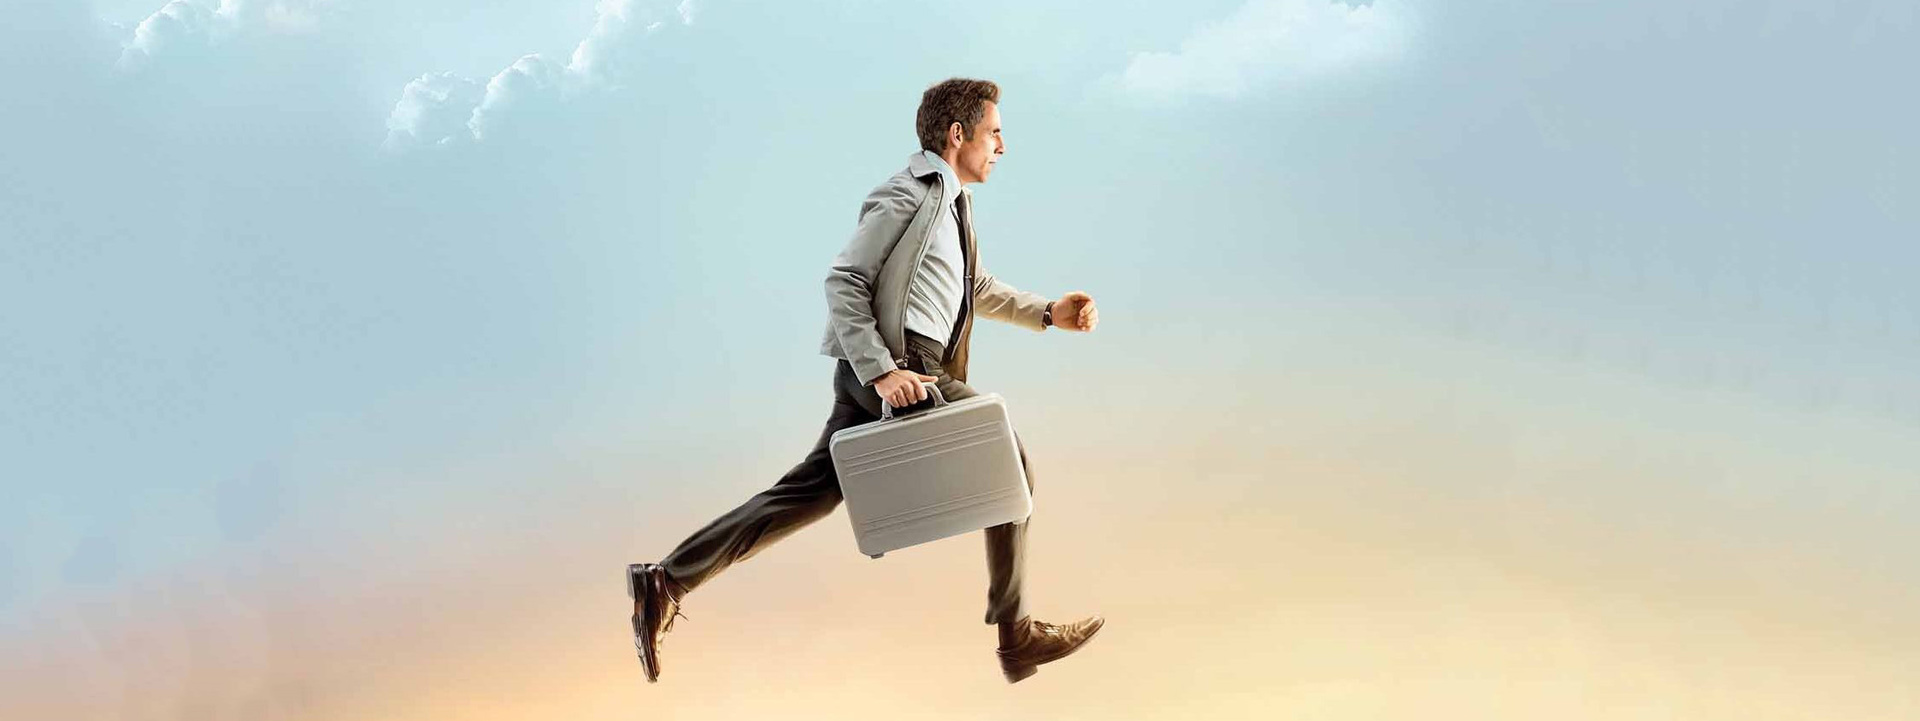 Movie poster The Secret Life of Walter Mitty